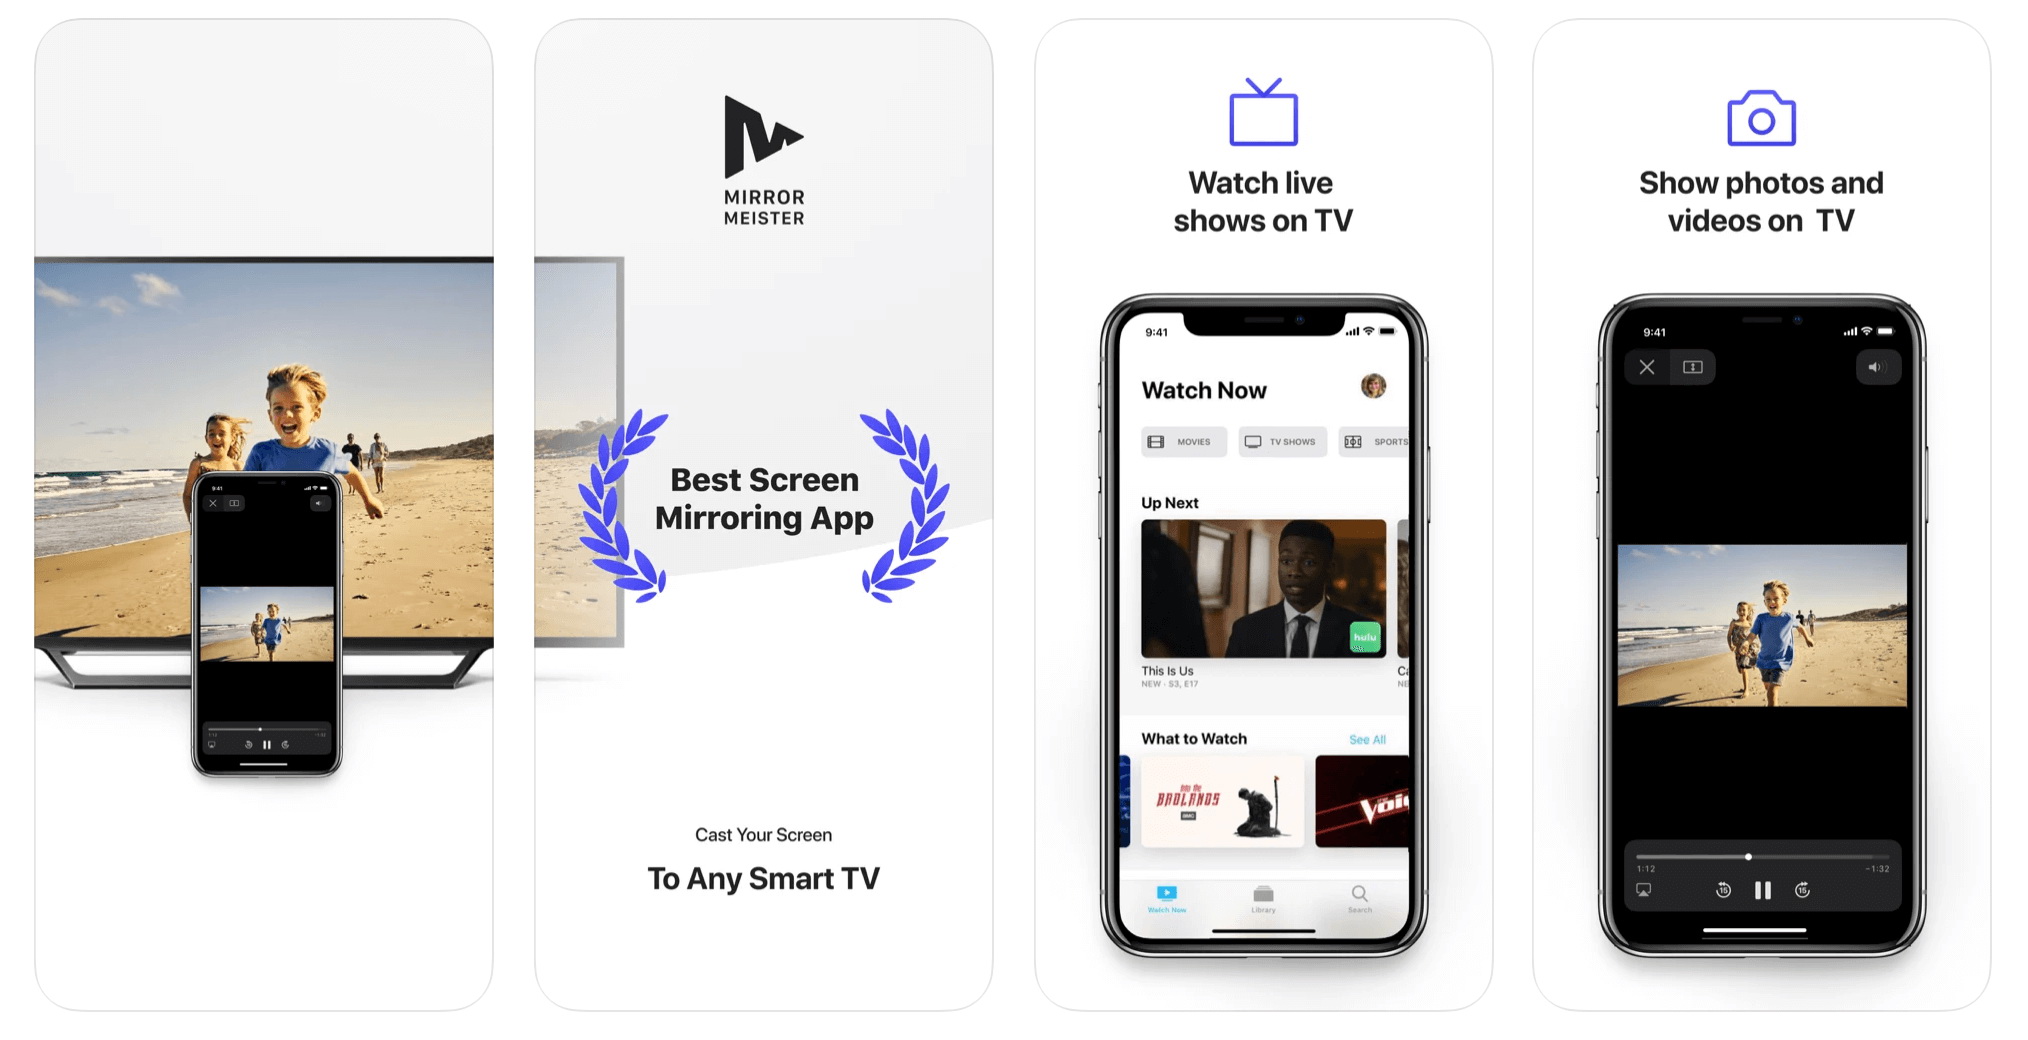  How-to-Connect -iPhone-to Samsung-TV-with-mirrormeister 